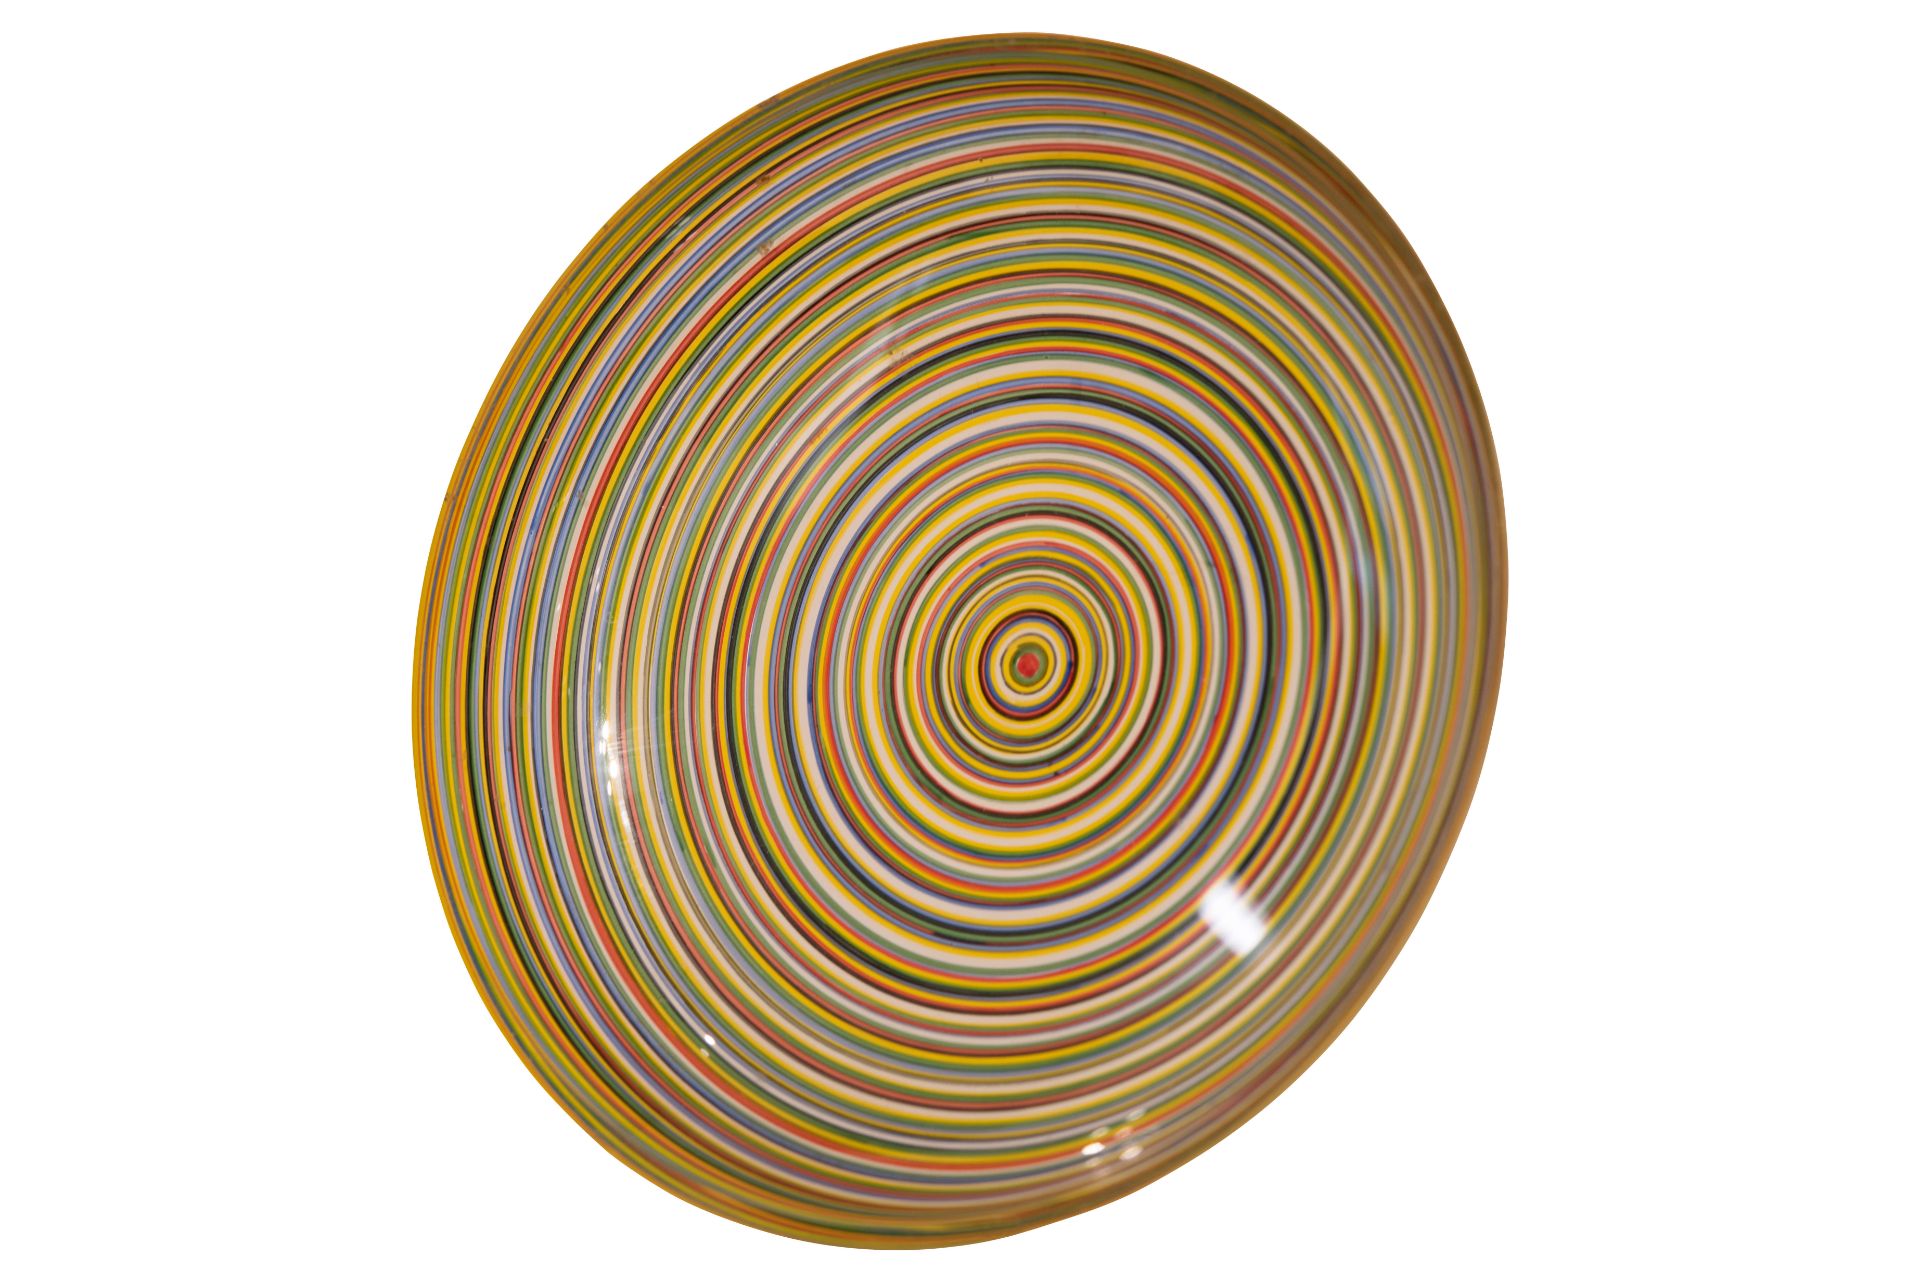 Glas Schale bunt bemalt | Glass Bowl Painted with Colorful Circles - Image 2 of 5